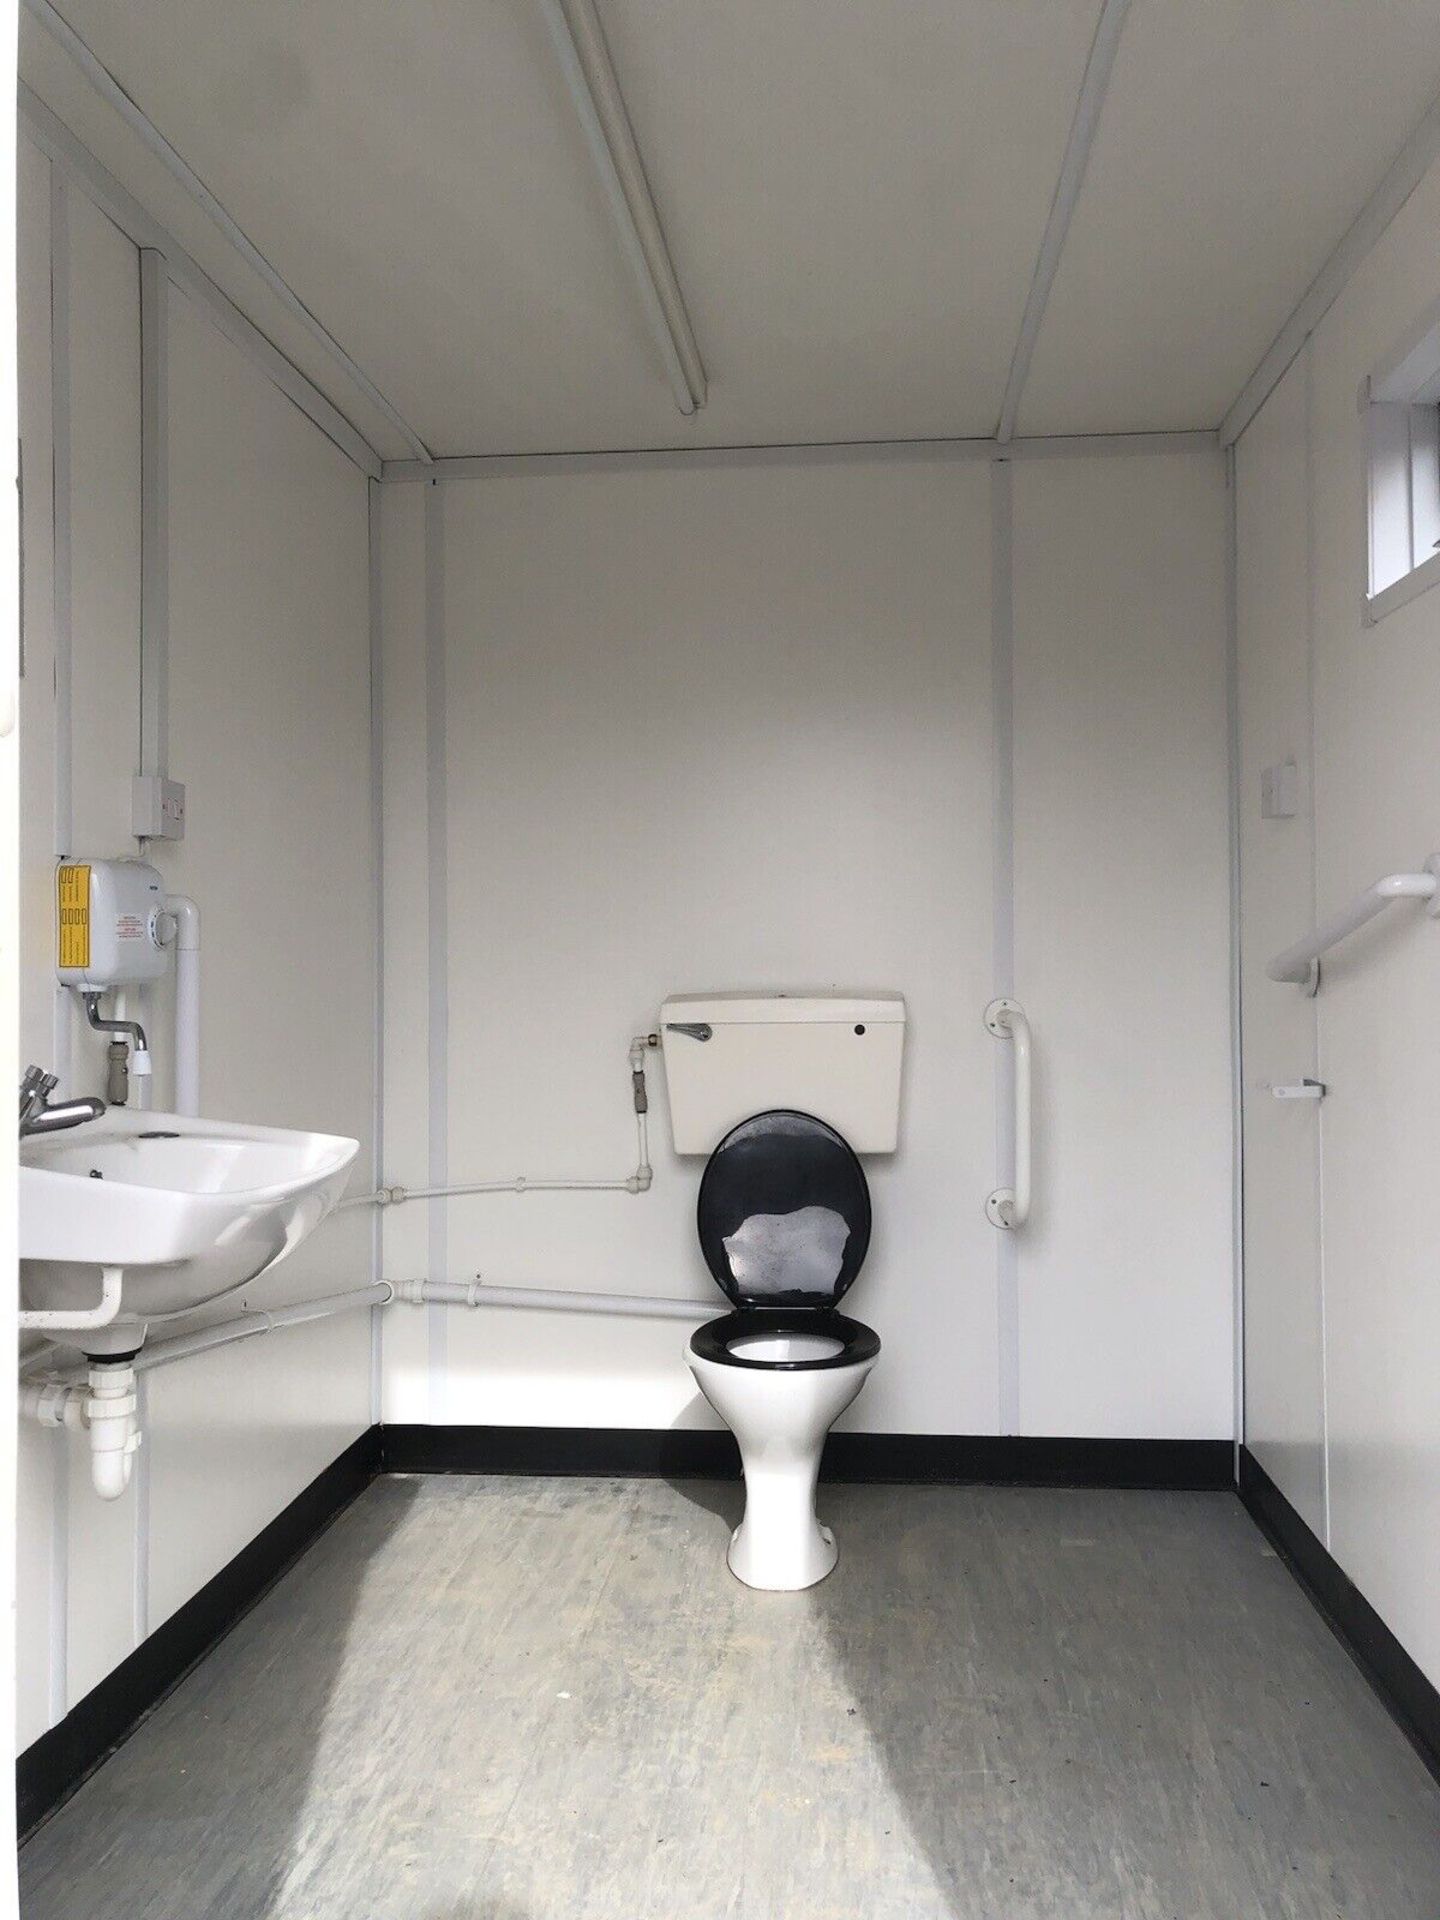 Portable Toilet Block With Shower Disabled Wheelch - Image 10 of 10